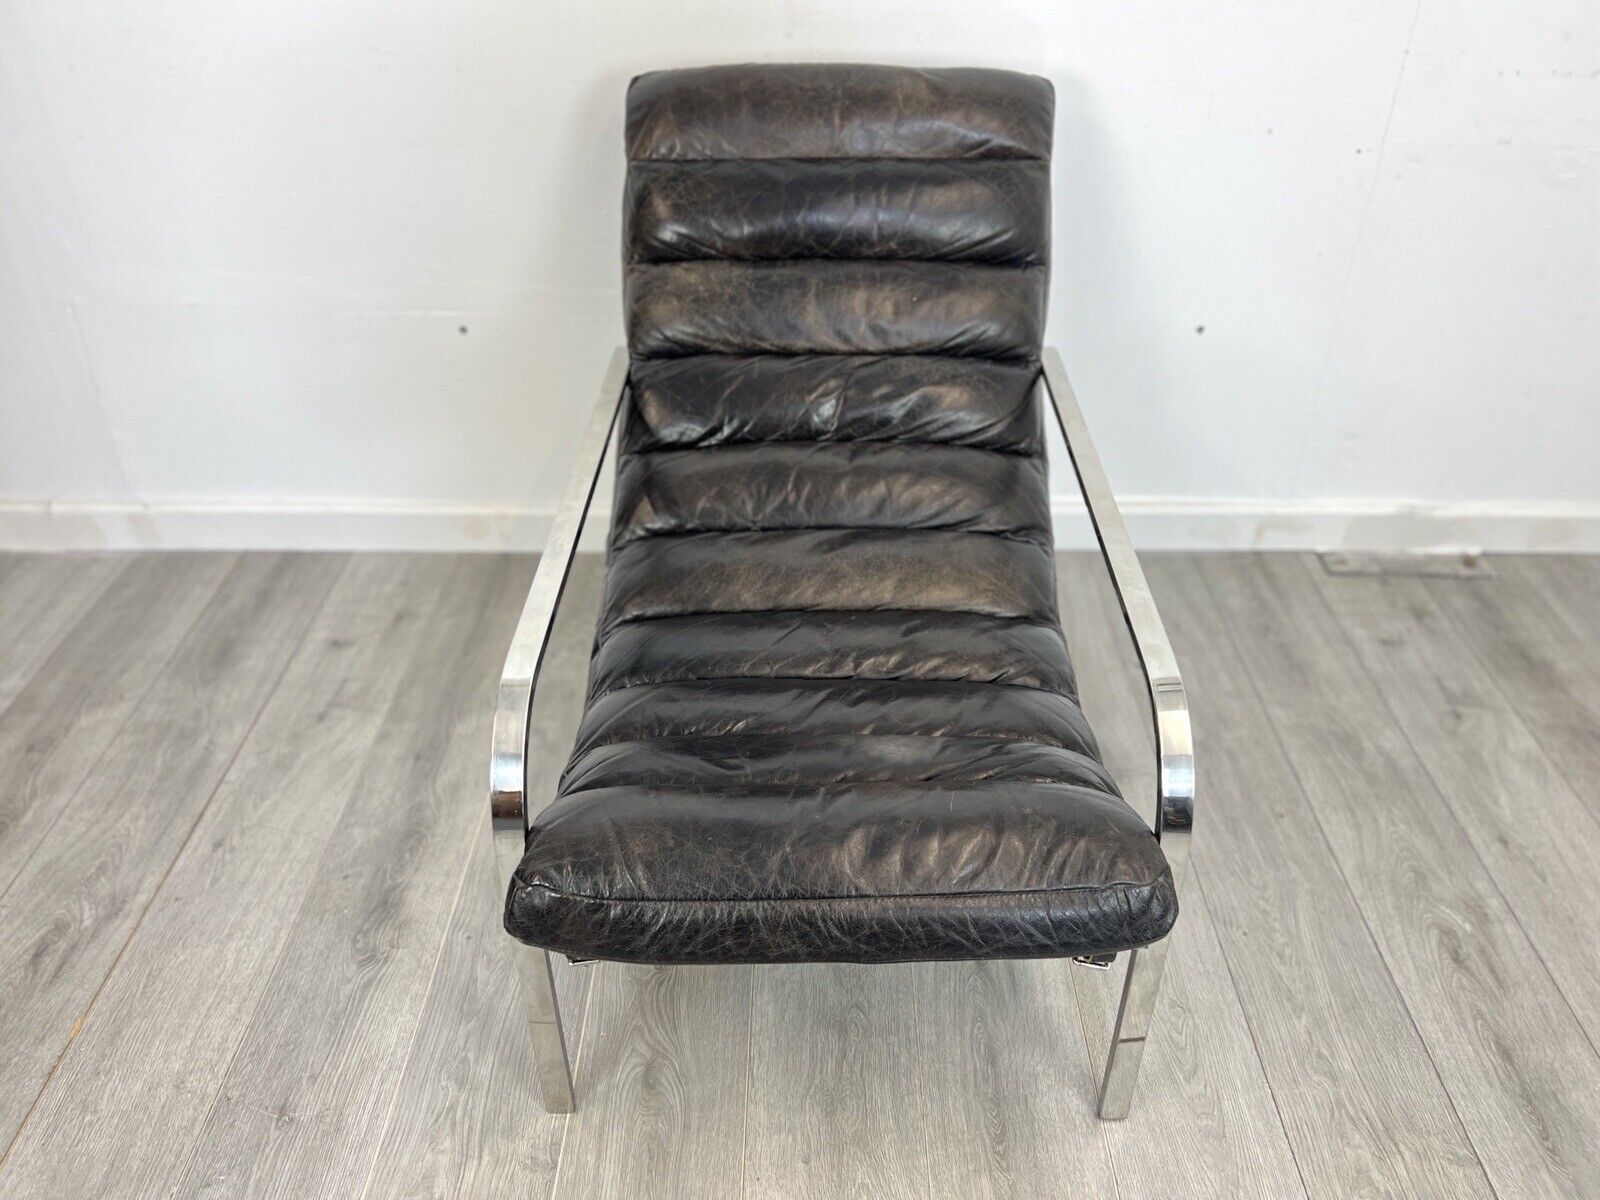 Halo Scott, Modern Leather and Chrome Accent / Lounge Chair for John Lewis